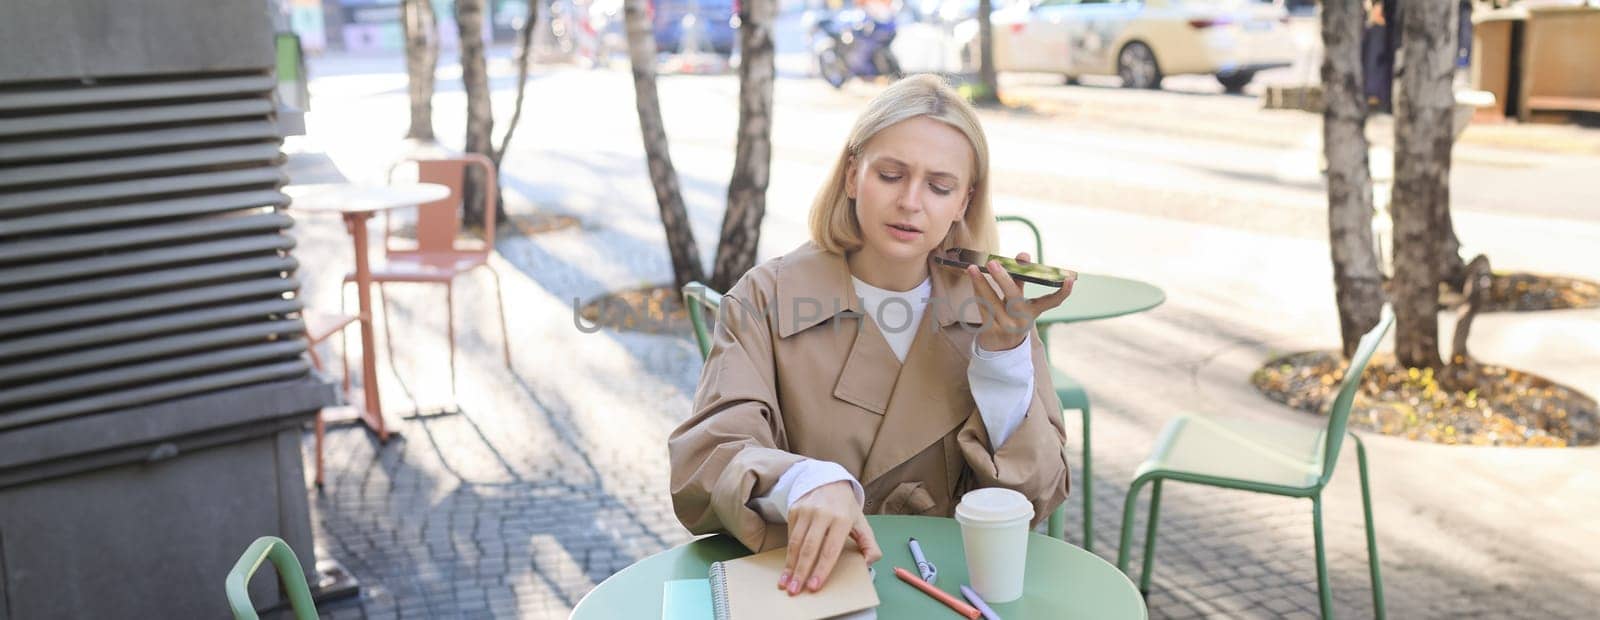 Portrait of serious, concentrated woman, opens her notebook, records voice message, sending notification to coworker, drinking coffee, working outdoors.